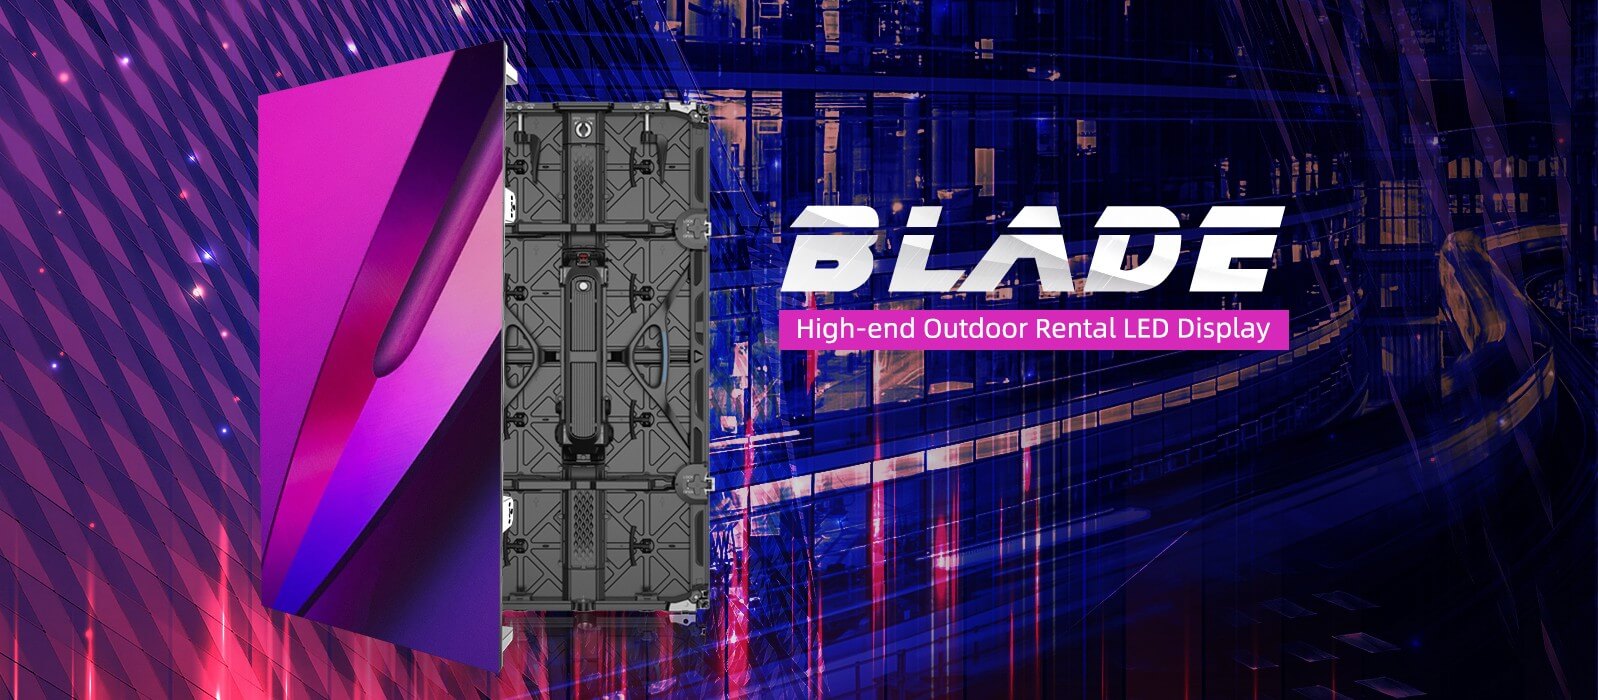 outdoor High-end Rental LED Dispaly - Blade Series